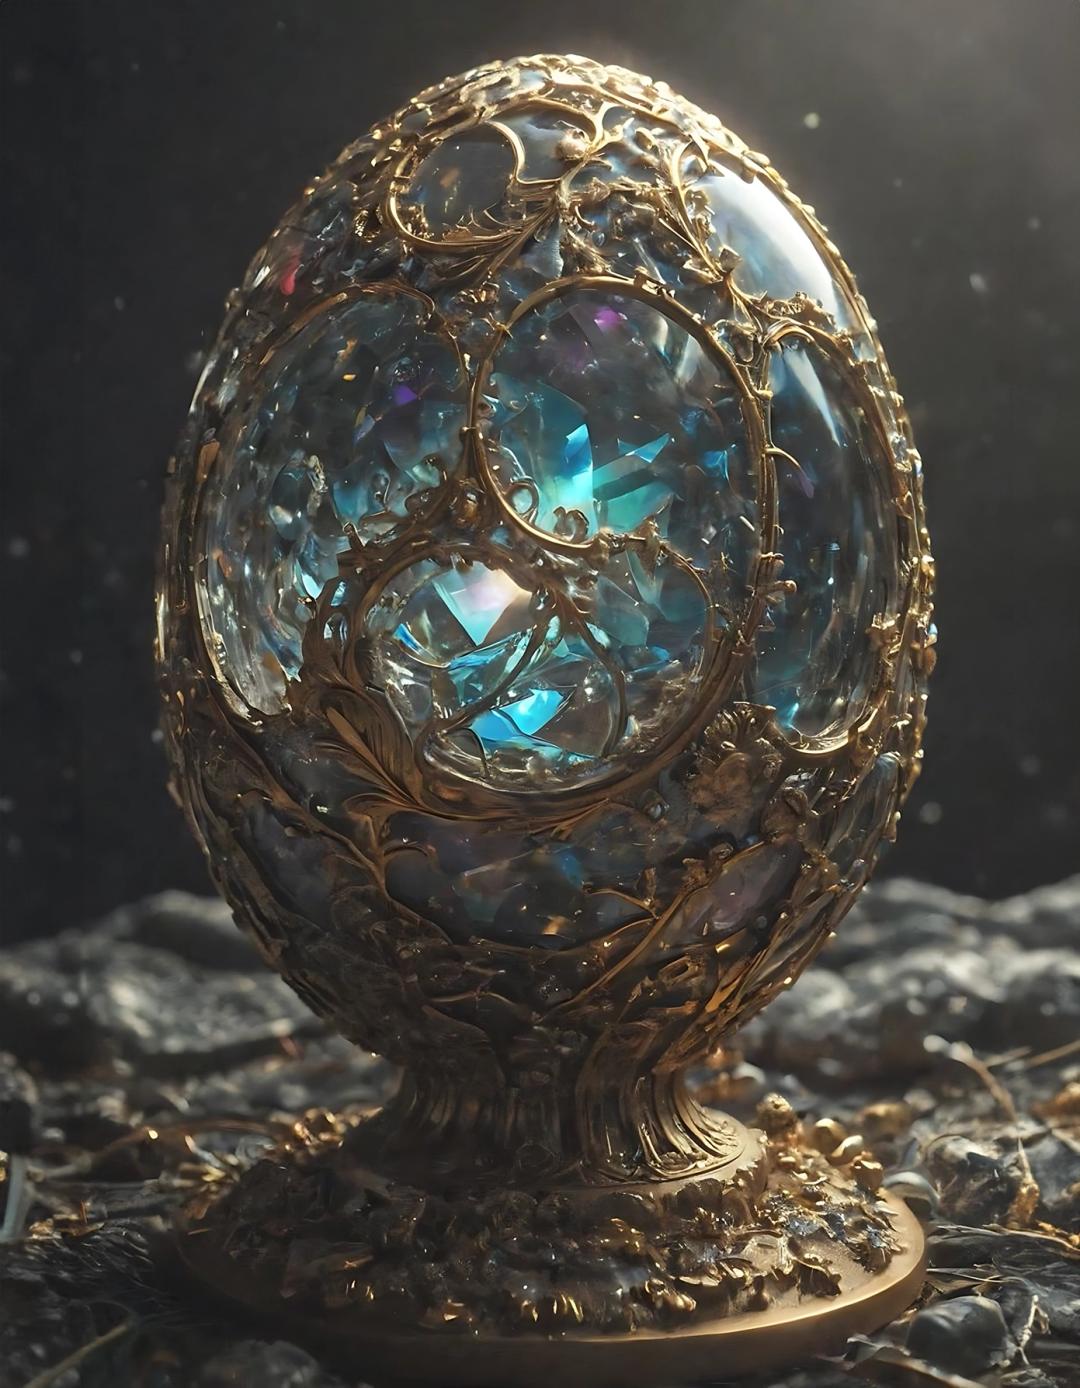 Crystal Egg with Gold Cover on it